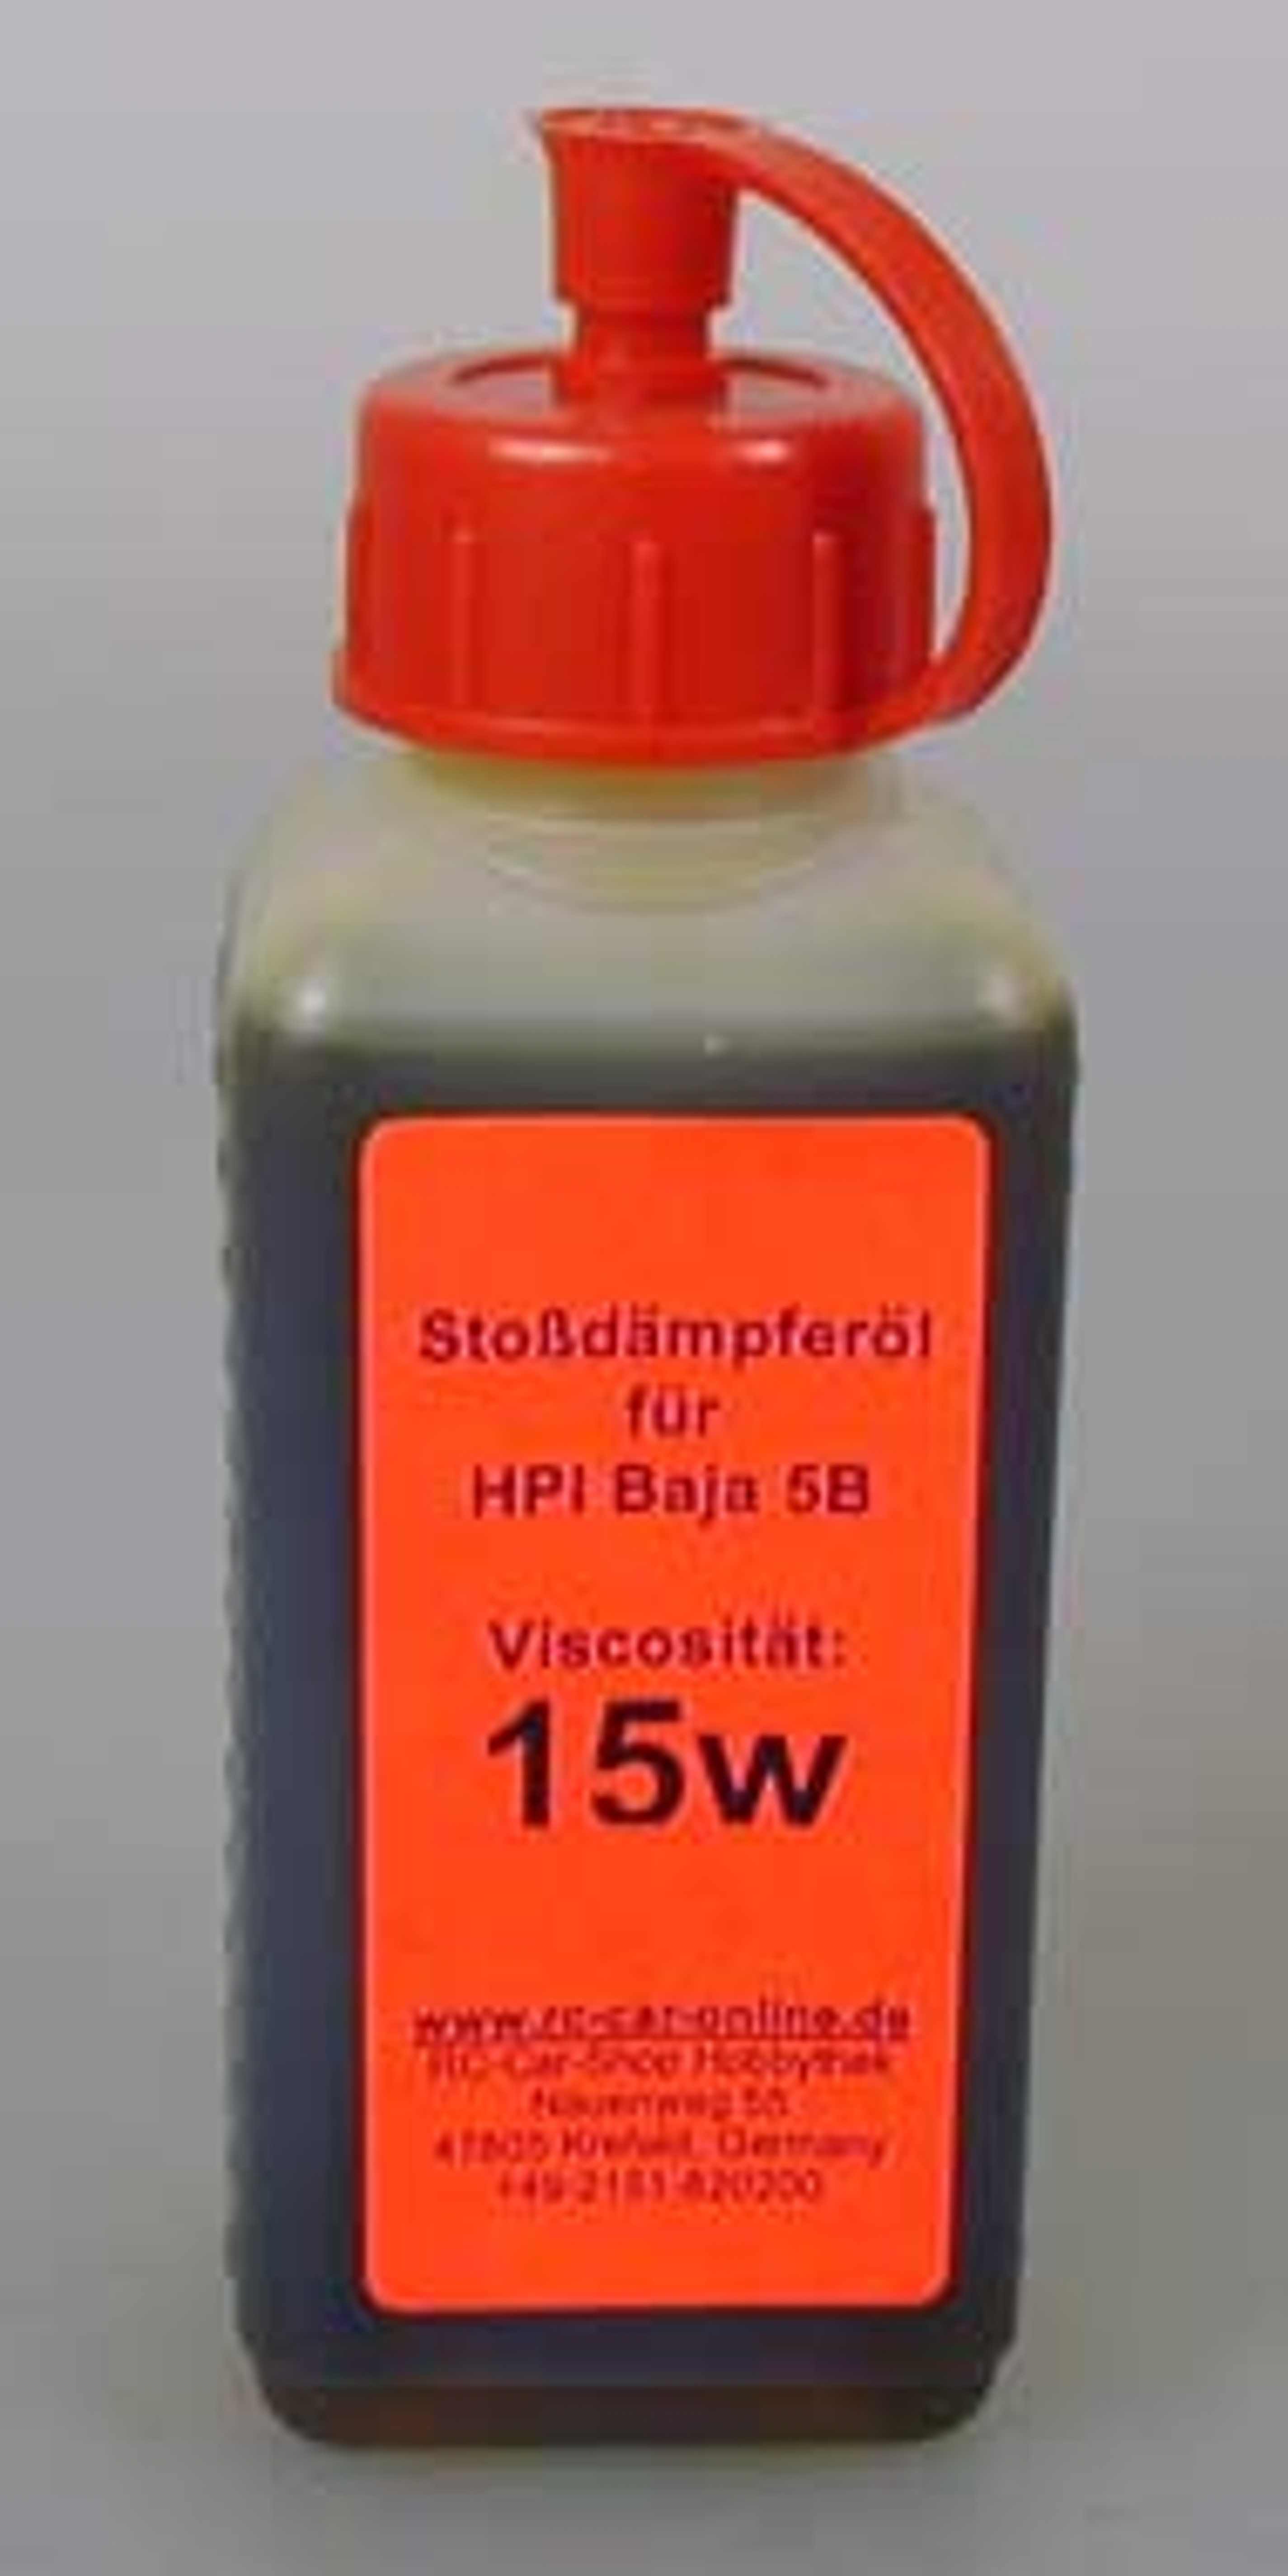 y0058 Shock absorber oil 10W - 20W for HPI and Mecatech Klick-Shocks, 1 pce.